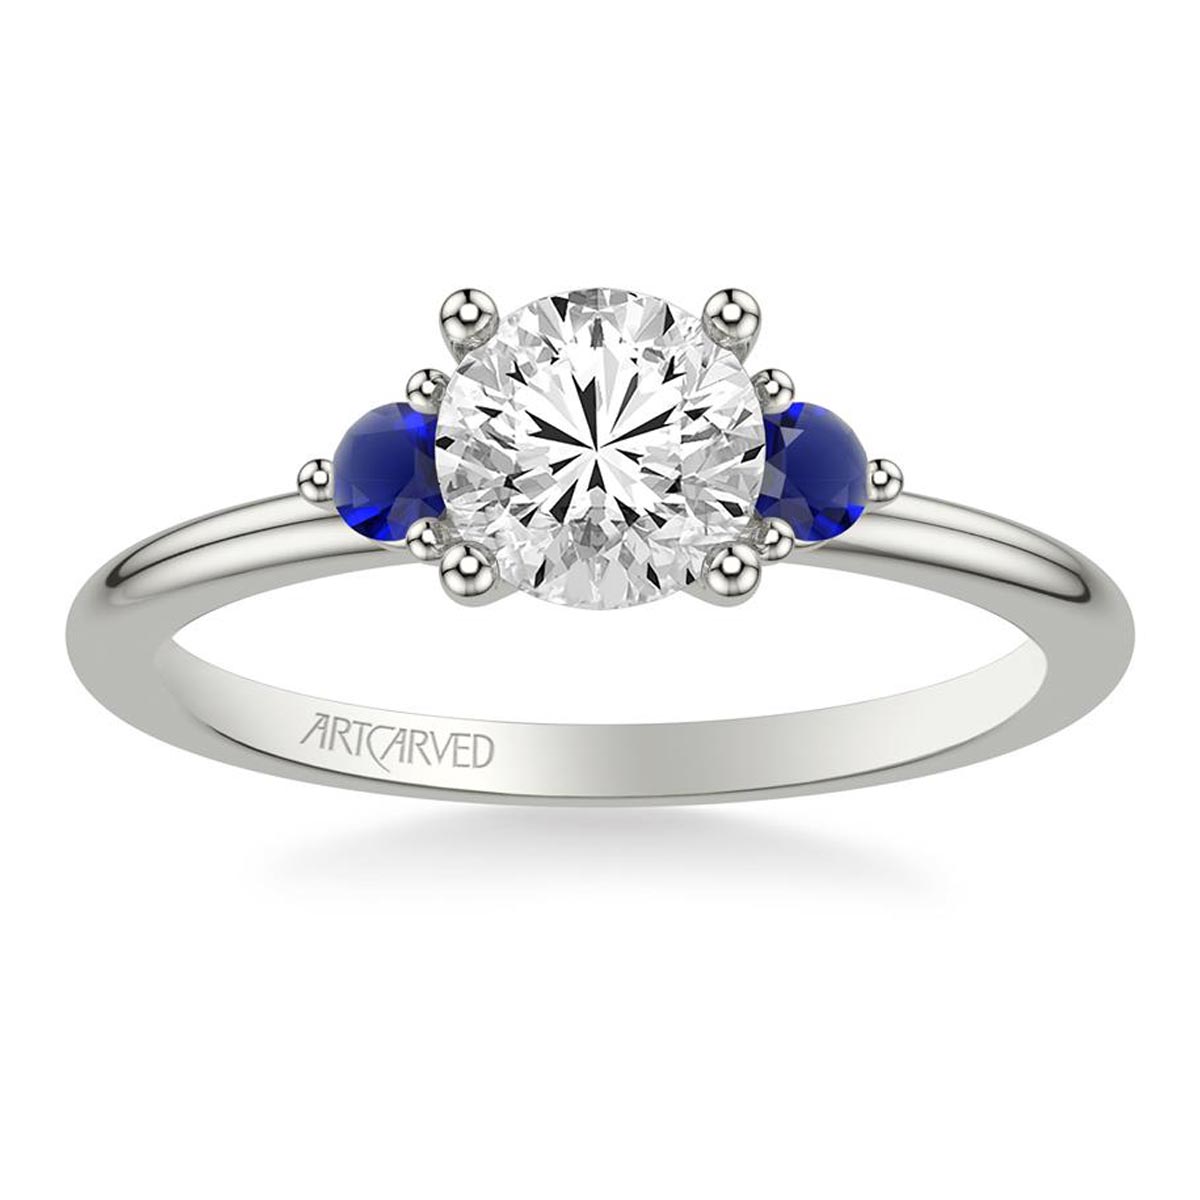 Artcarved Classic Three Stone Diamond Engagement Ring Setting in 14kt White Gold with Sapphires